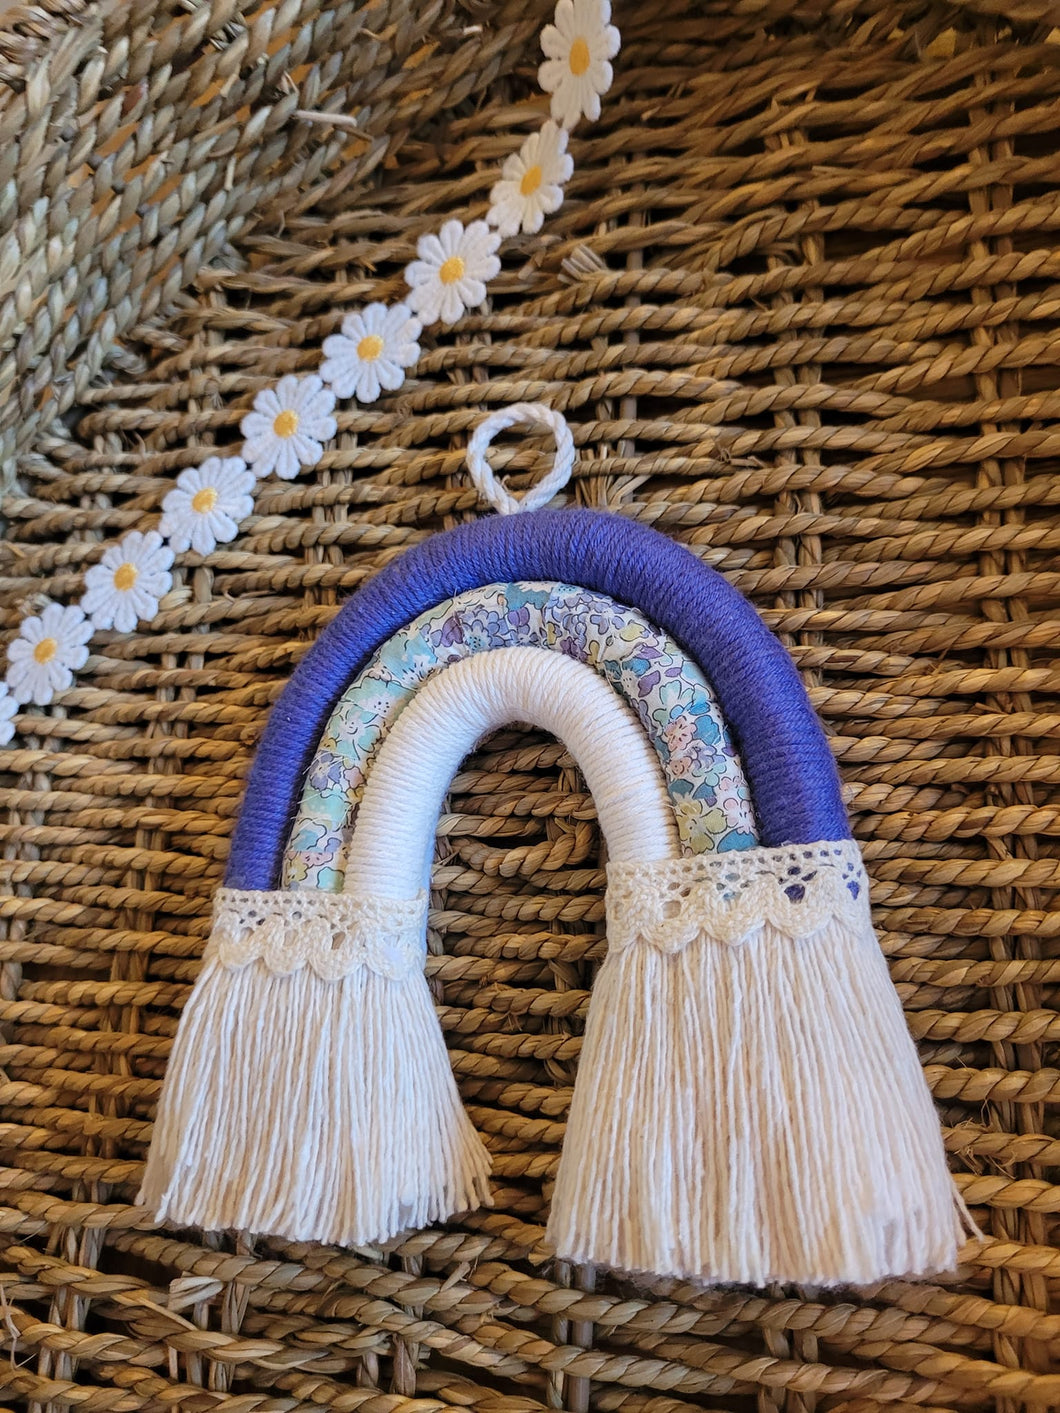 Small Macrame Rainbow Wall Hanging - Blue, Floral,White - LittleNellMakes